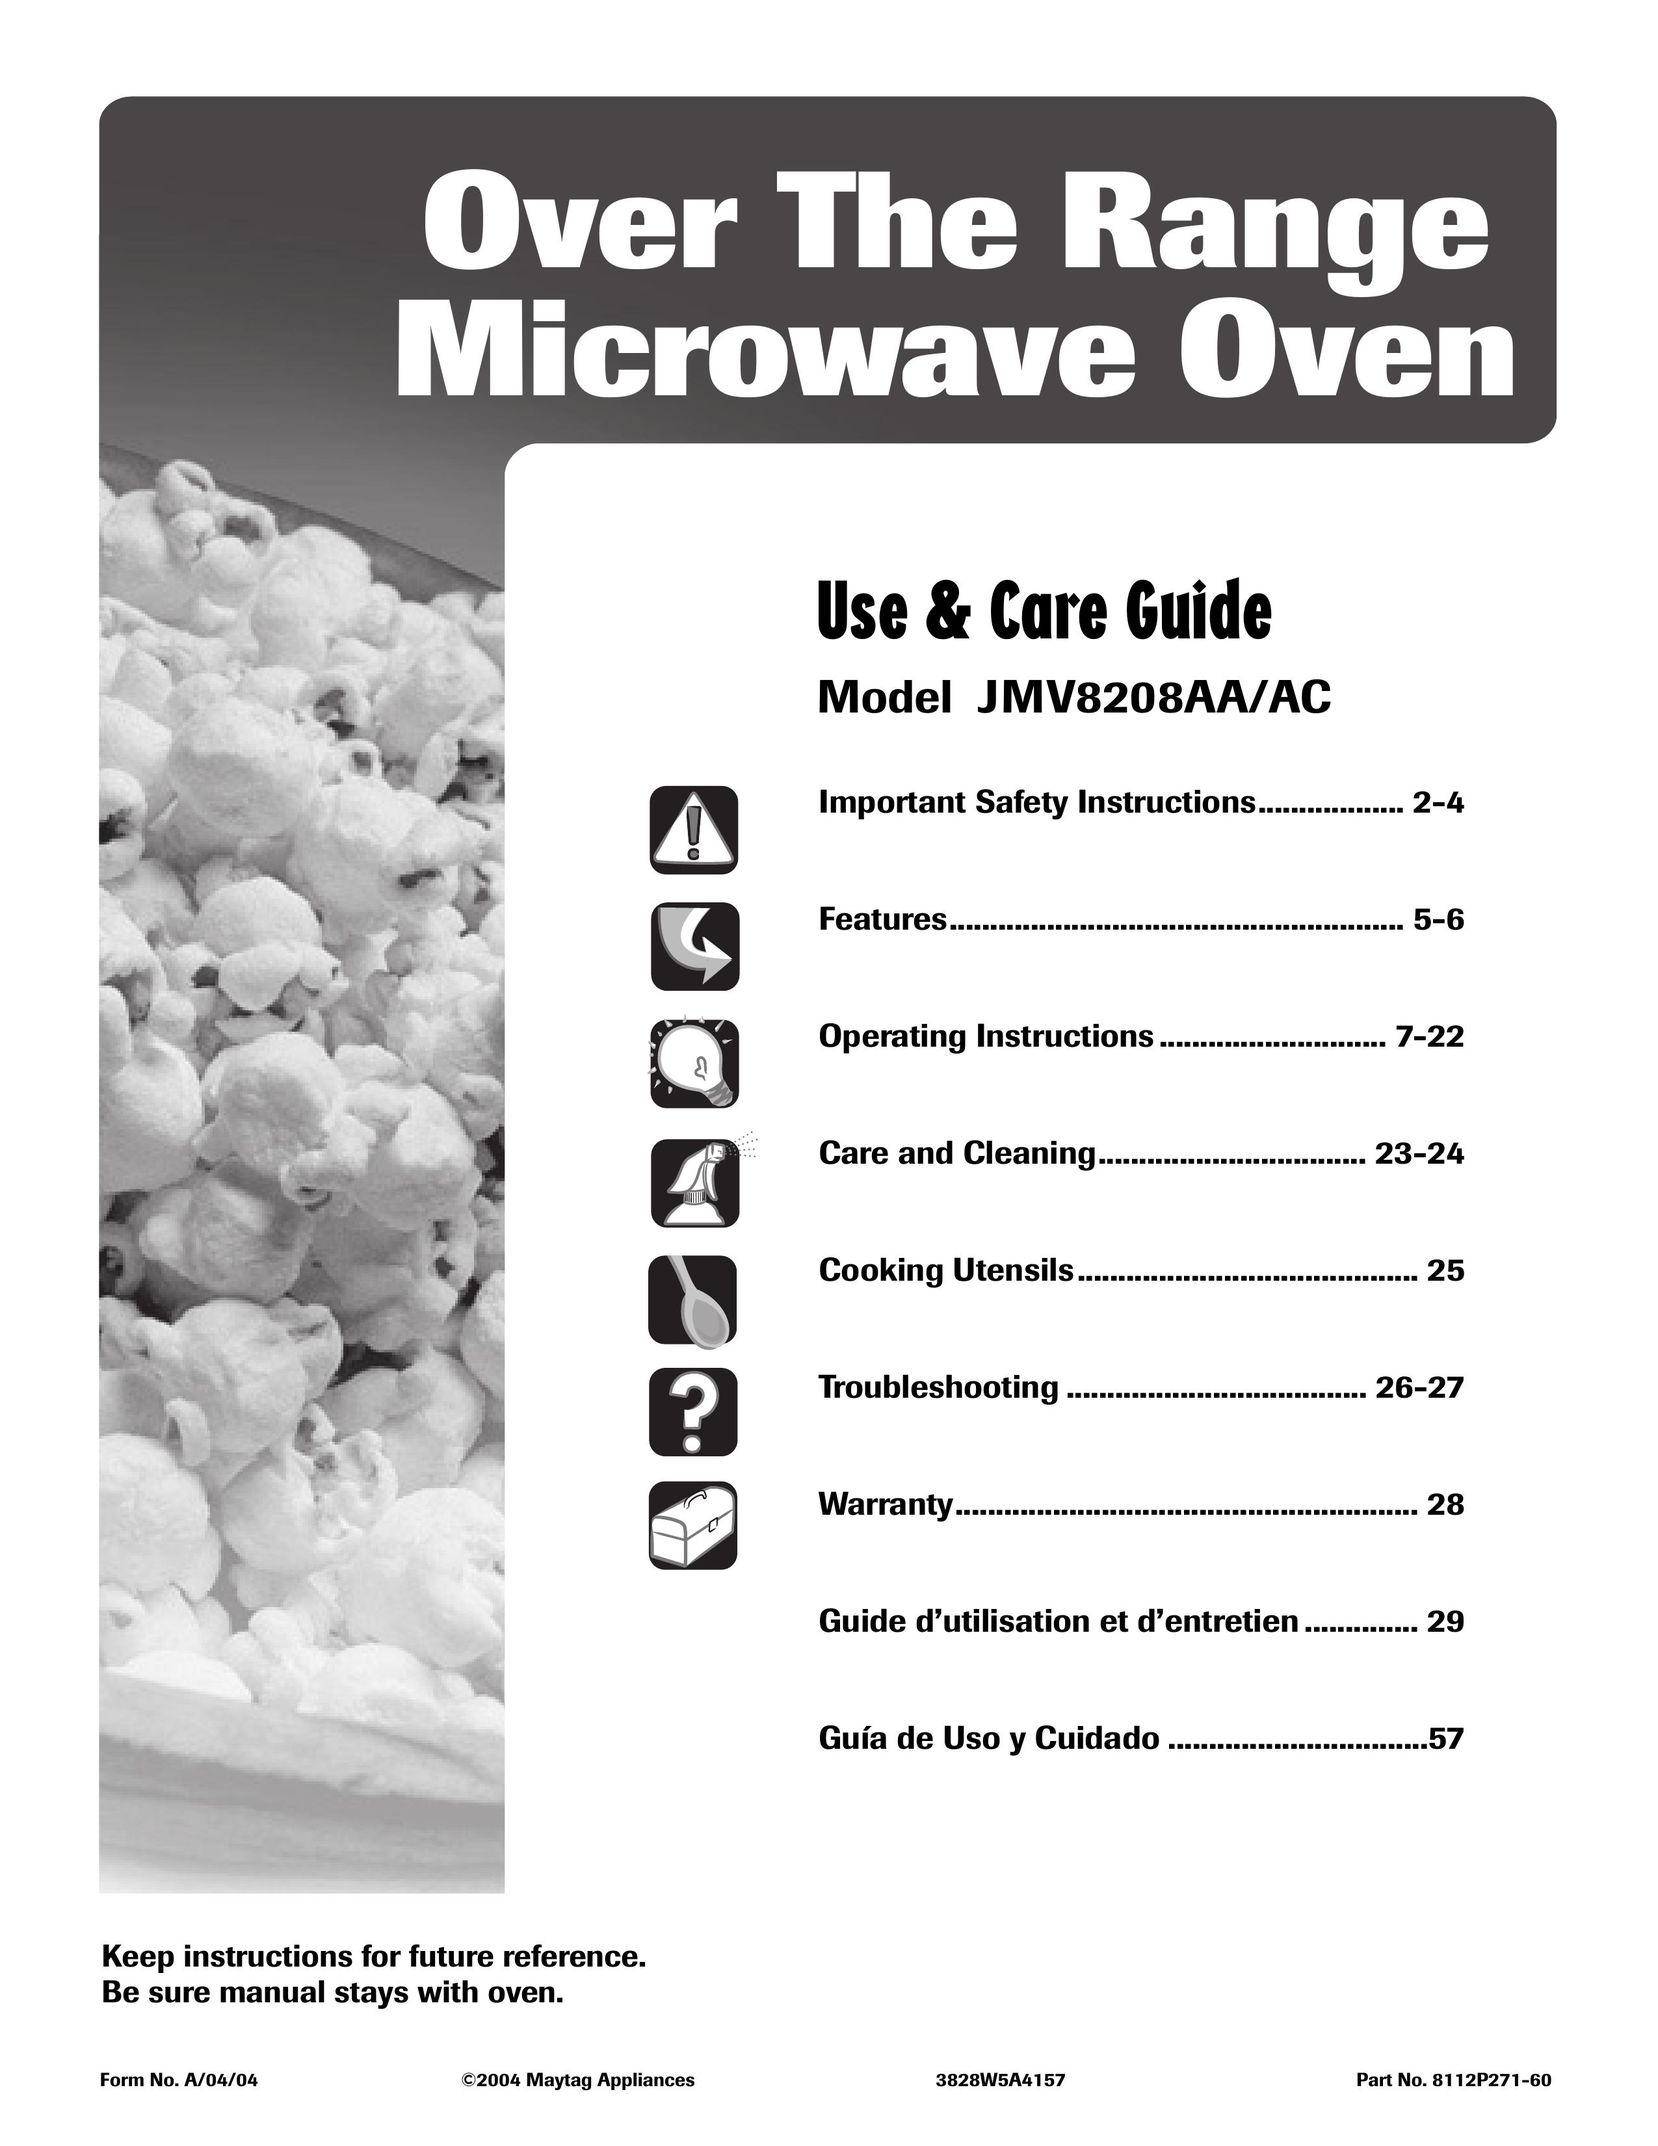 Maytag JMV8208AA/AC Microwave Oven User Manual